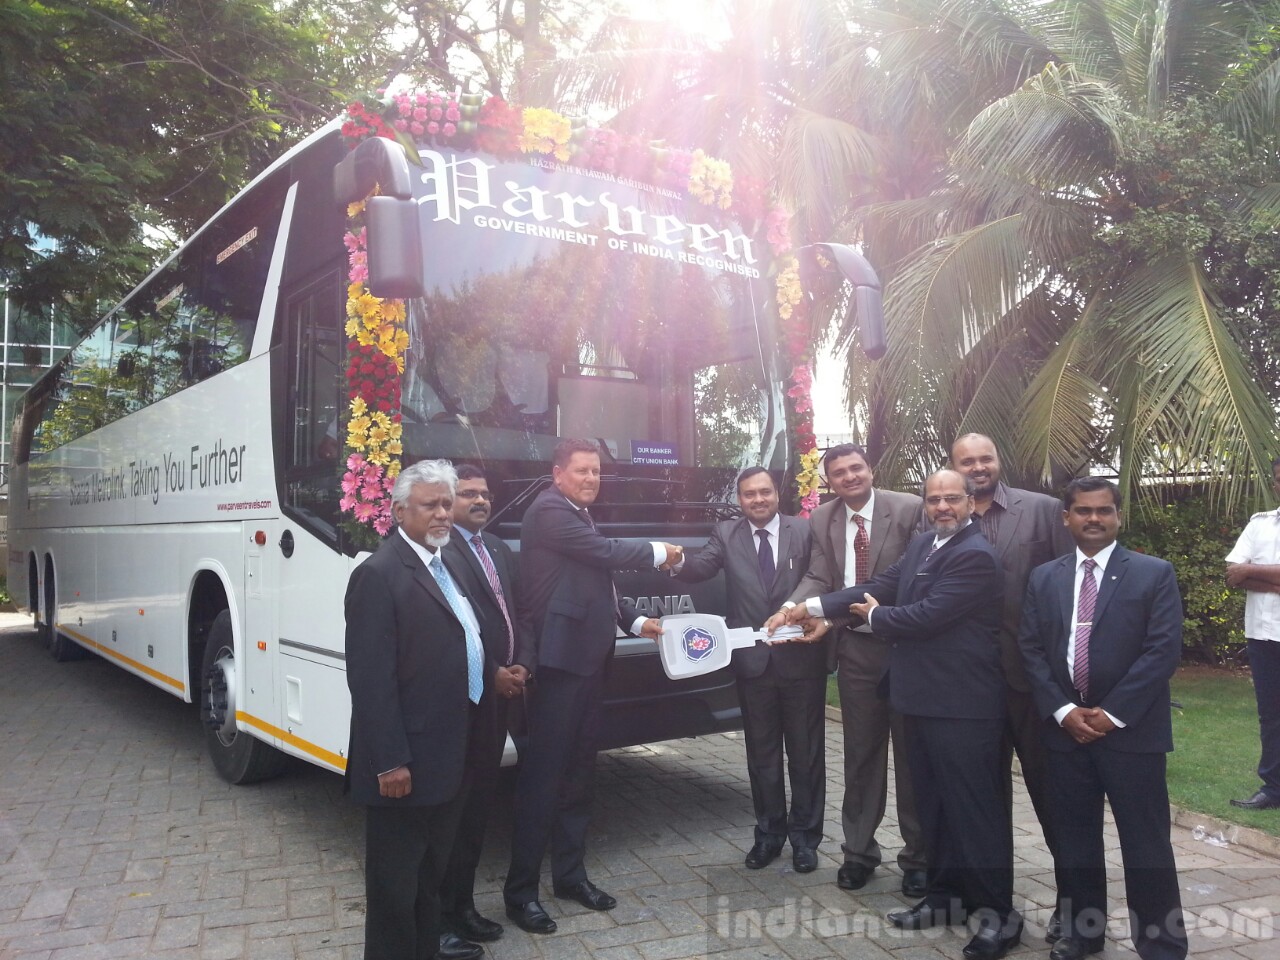 Scania Metrolink Bus Delivered In Chennai To Parveen